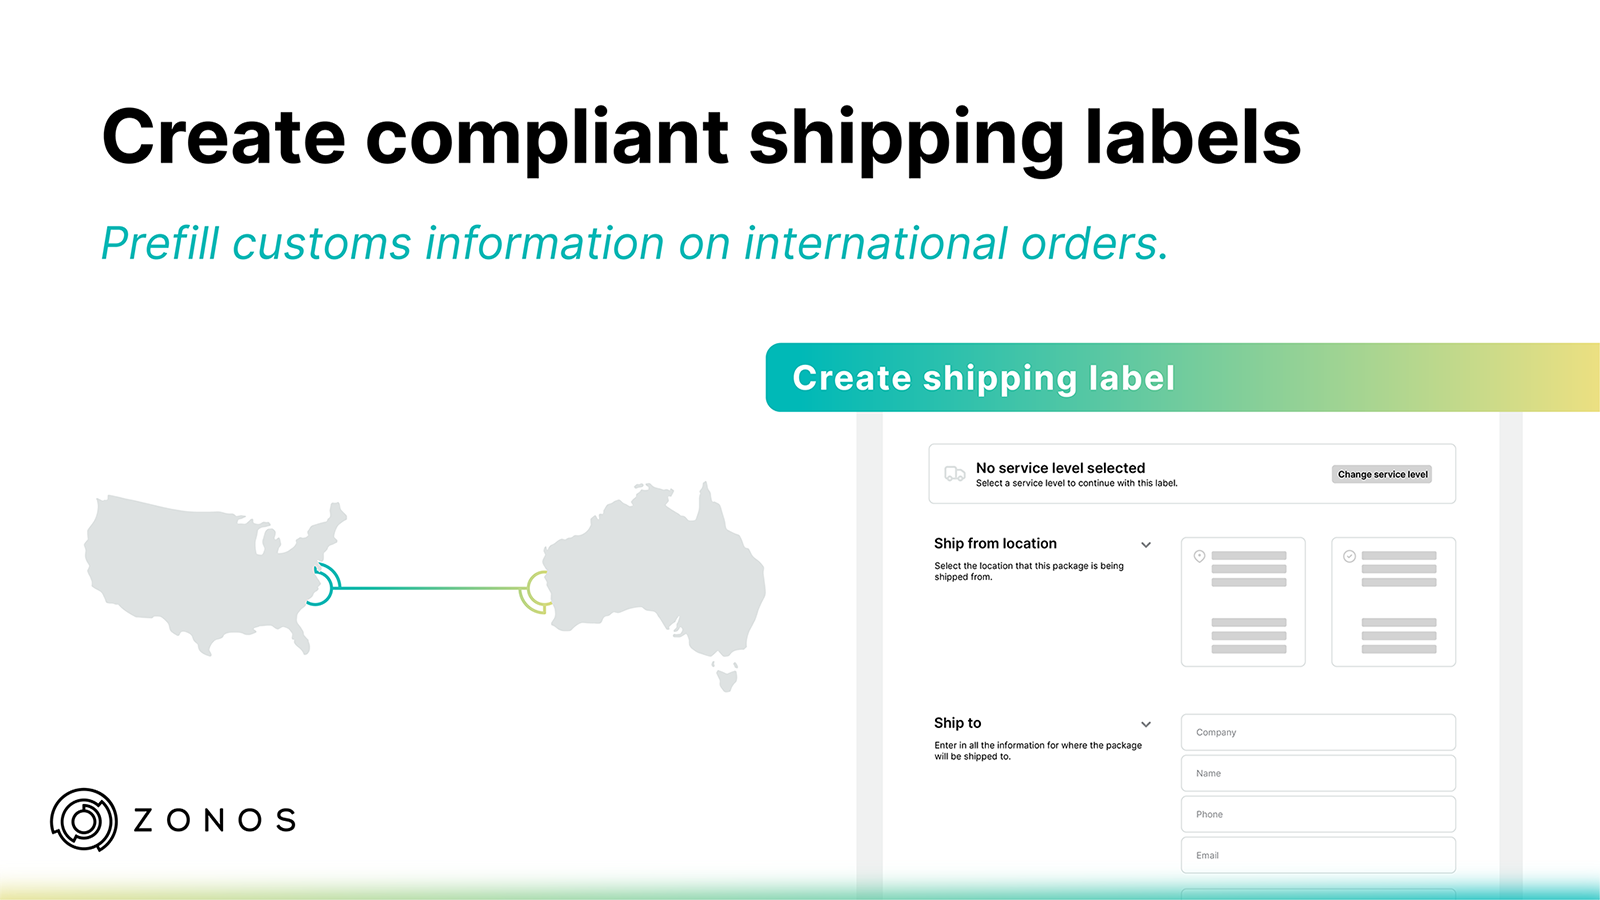 Create compliant shipping labels